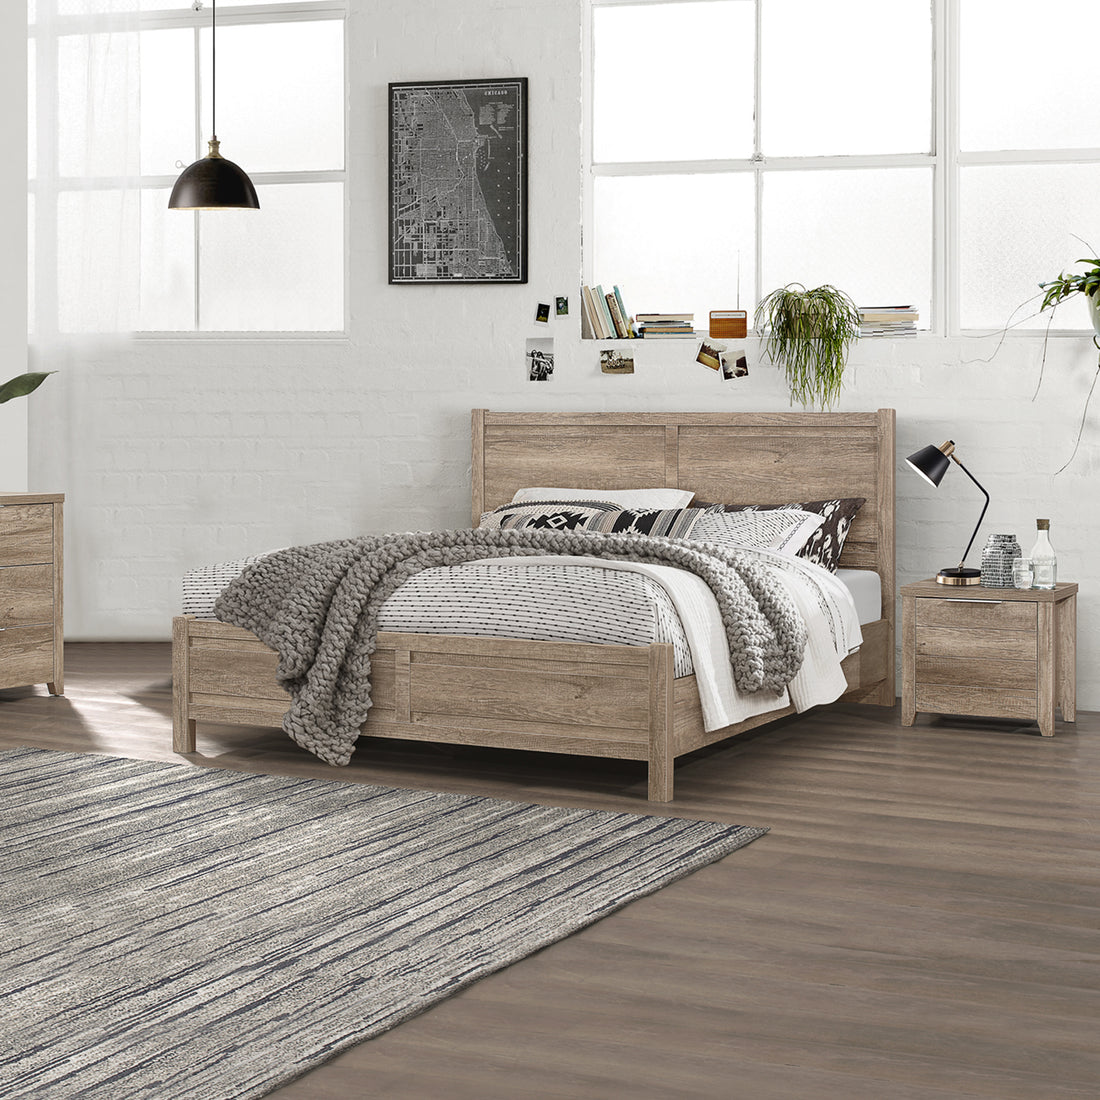 3 Pieces Bedroom Suite Natural Wood Look Bed, Bedside Table